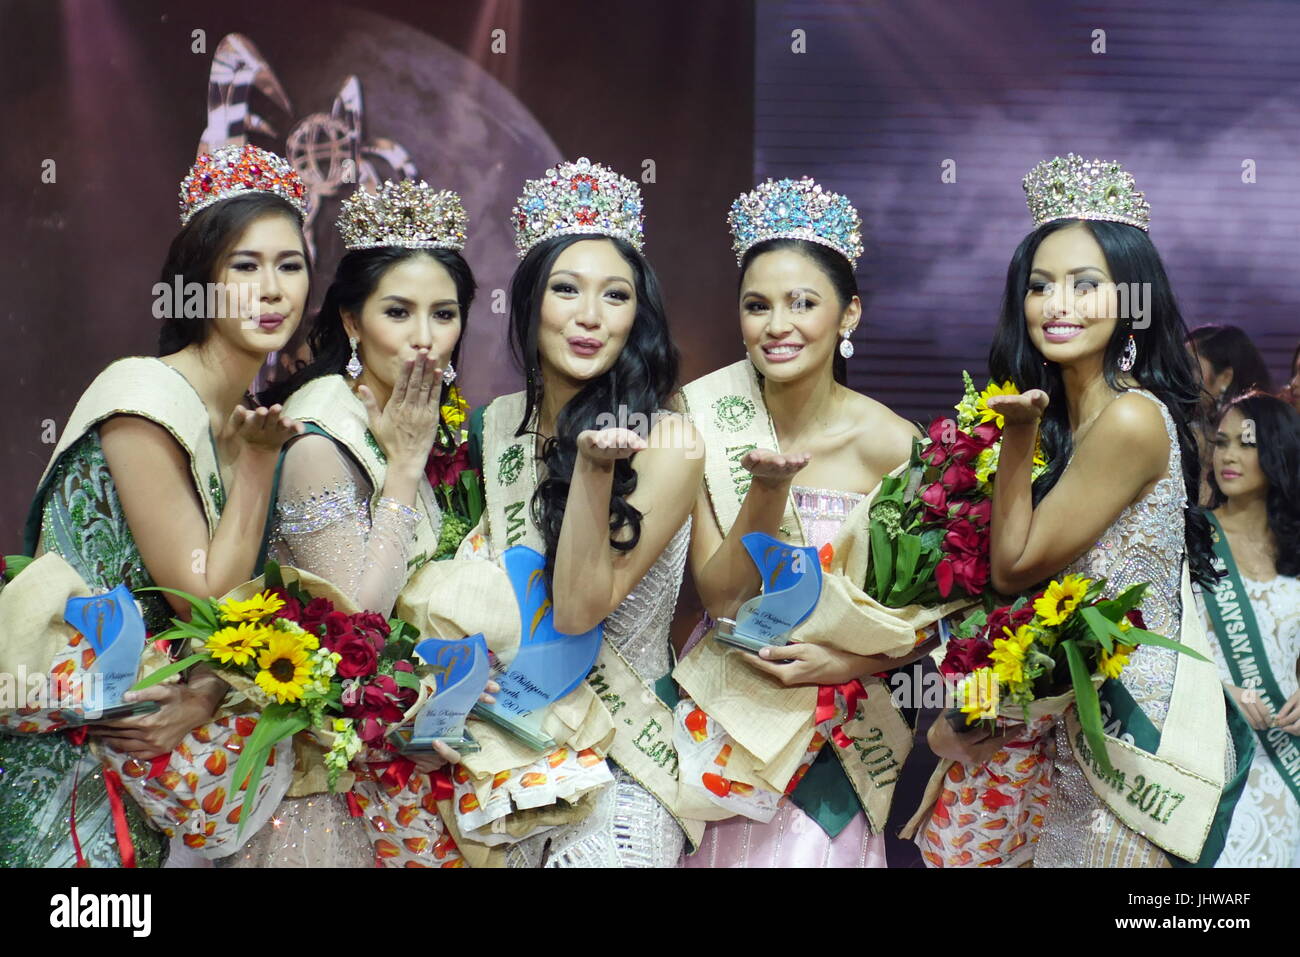 Pasay, Philippines. 15th July, 2017. The winners gives out a flying kiss. From Left to right: Miss Fire, Miss Villanueva Misamis Oriental, Nellza Bautista, age 19. Miss Air, Miss Olongapo City, Kim De Guzman, age 24. Miss Earth, Miss Manila, Karen Ibasco, age 26. Miss Eco Tourism, Miss Lobo Batangas, Vanessa Mae Castillo, age 21. Miss Water, Miss Caloocan City, Jessica Marasigan, age 23. Miss Earth Philippines coronation night happened SM Mall of Asia Arena. Credit: George Buid/Pacific Press/Alamy Live News Stock Photo